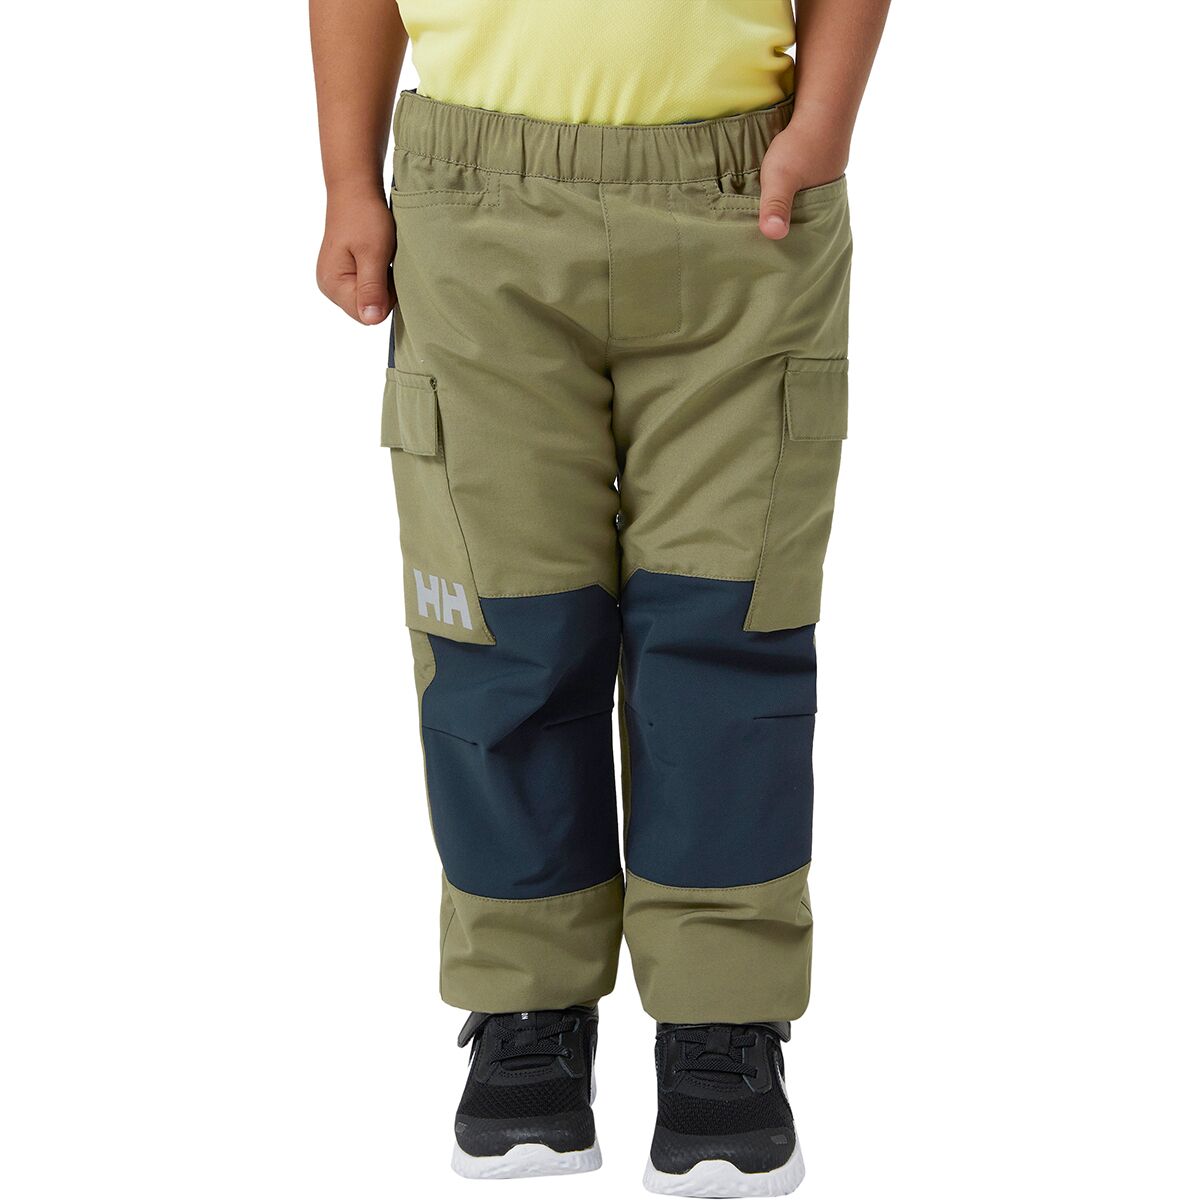 Helly Hansen Marka Tur Pant - Toddlers'